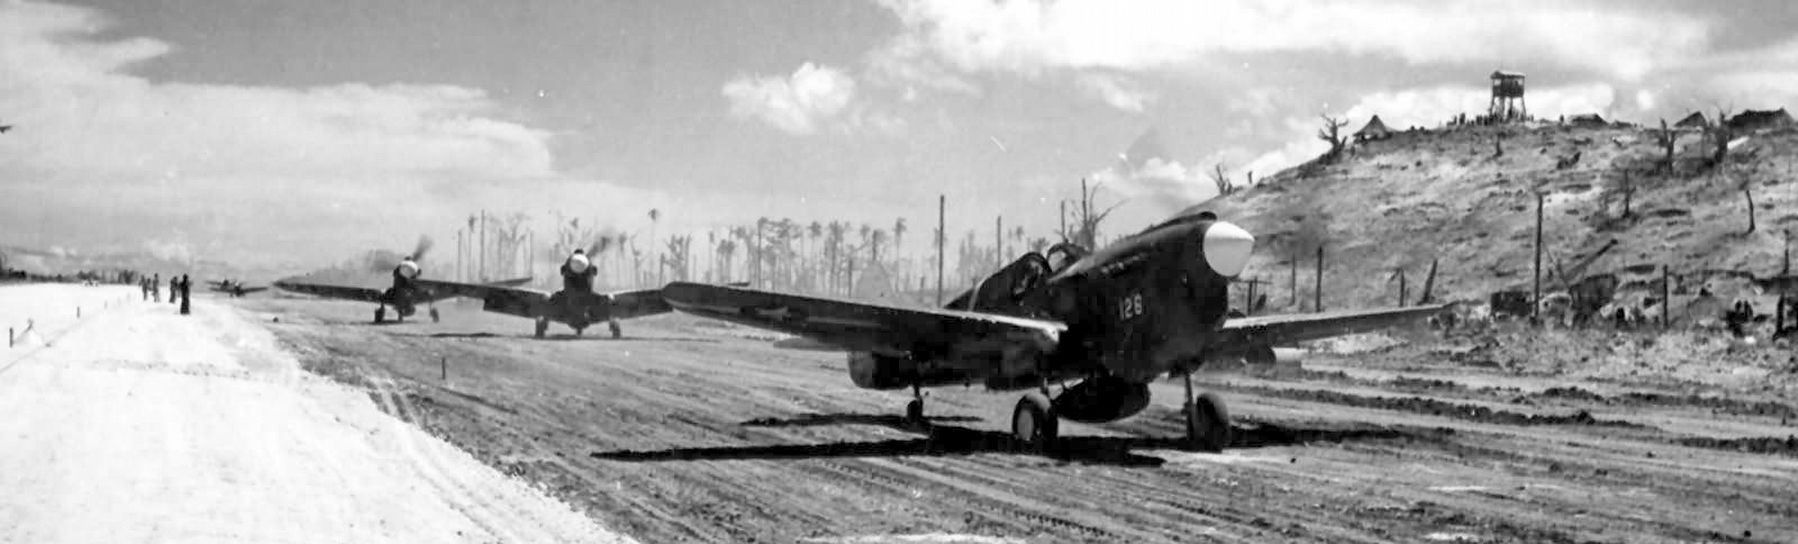 P-40s of the 44th FS Vampires, 18th Fighter Group, on Munda airstrip - August 1943 image. Click for full size.